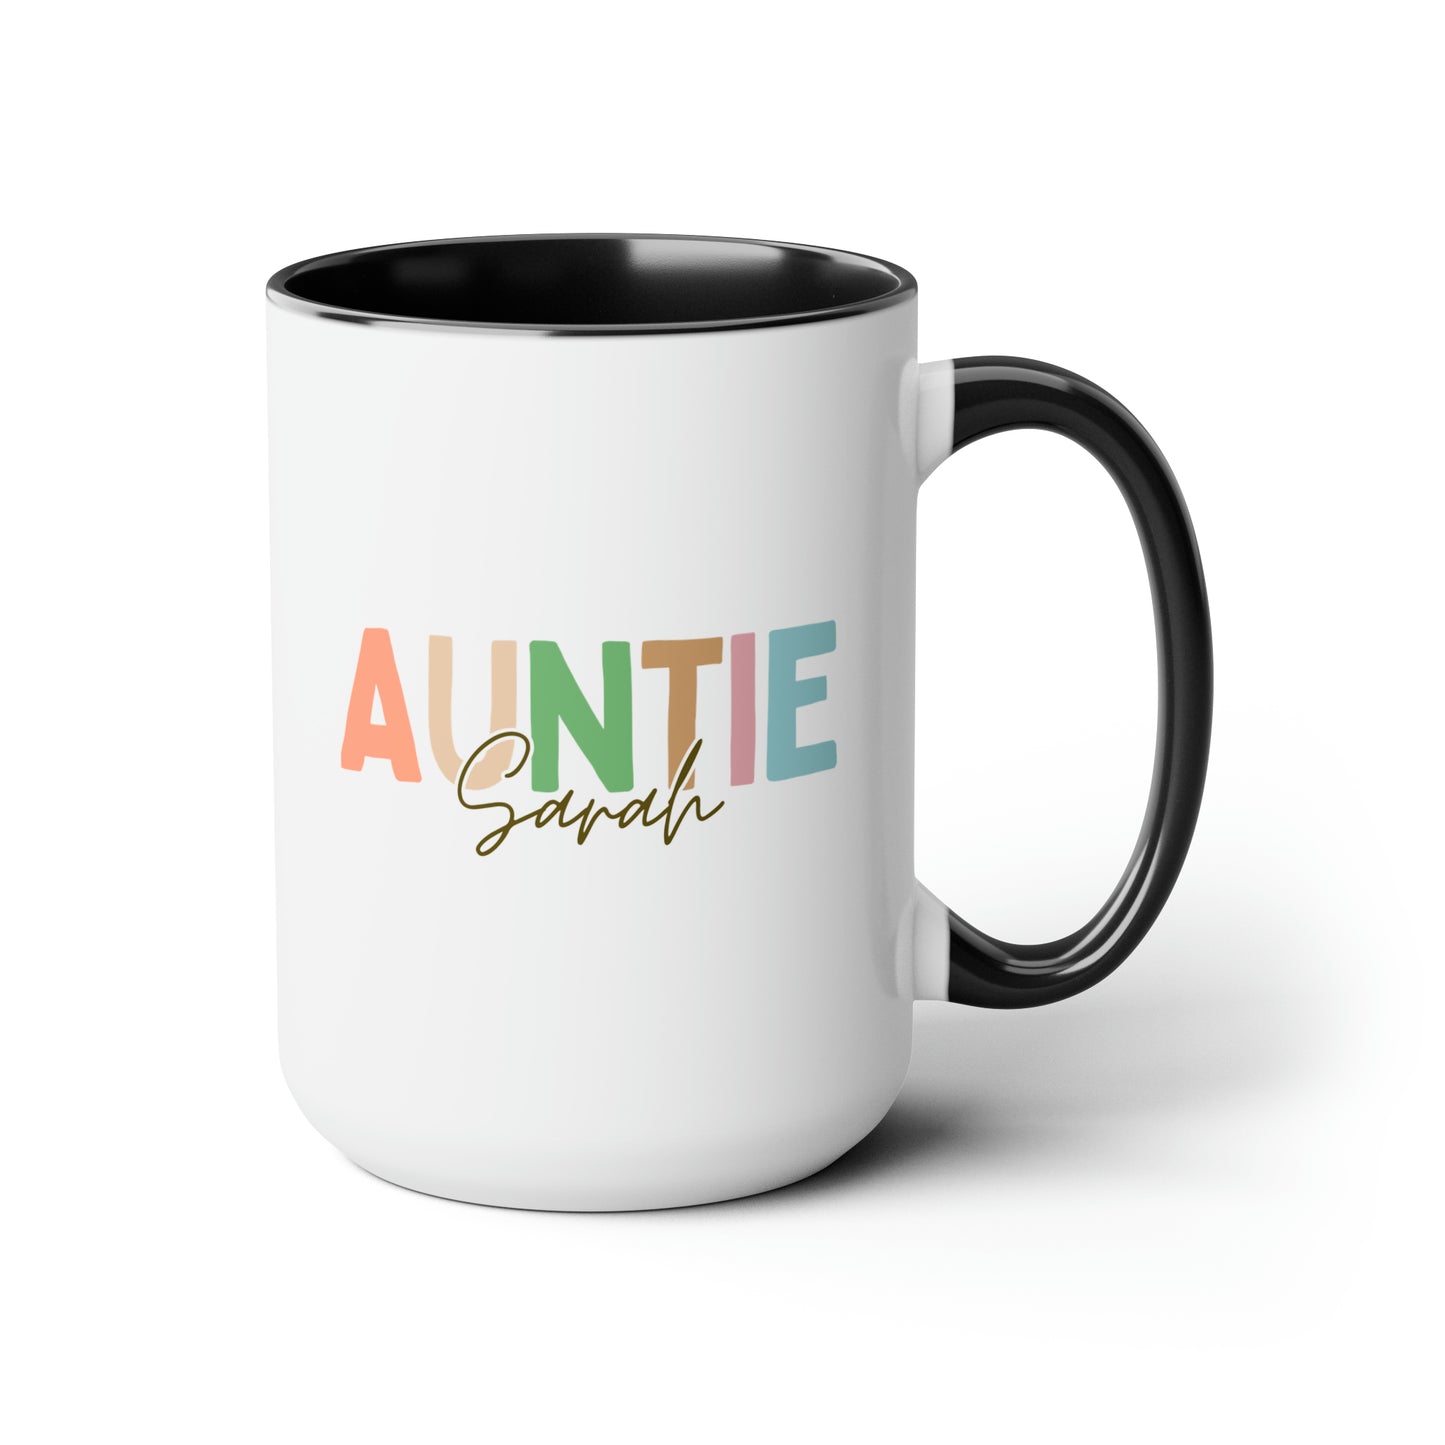 Auntie Name 15oz white with black accent funny large coffee mug gift for aunt mothers day birthday cool fun funtie custom name personalize waveywares wavey wares wavywares wavy wares